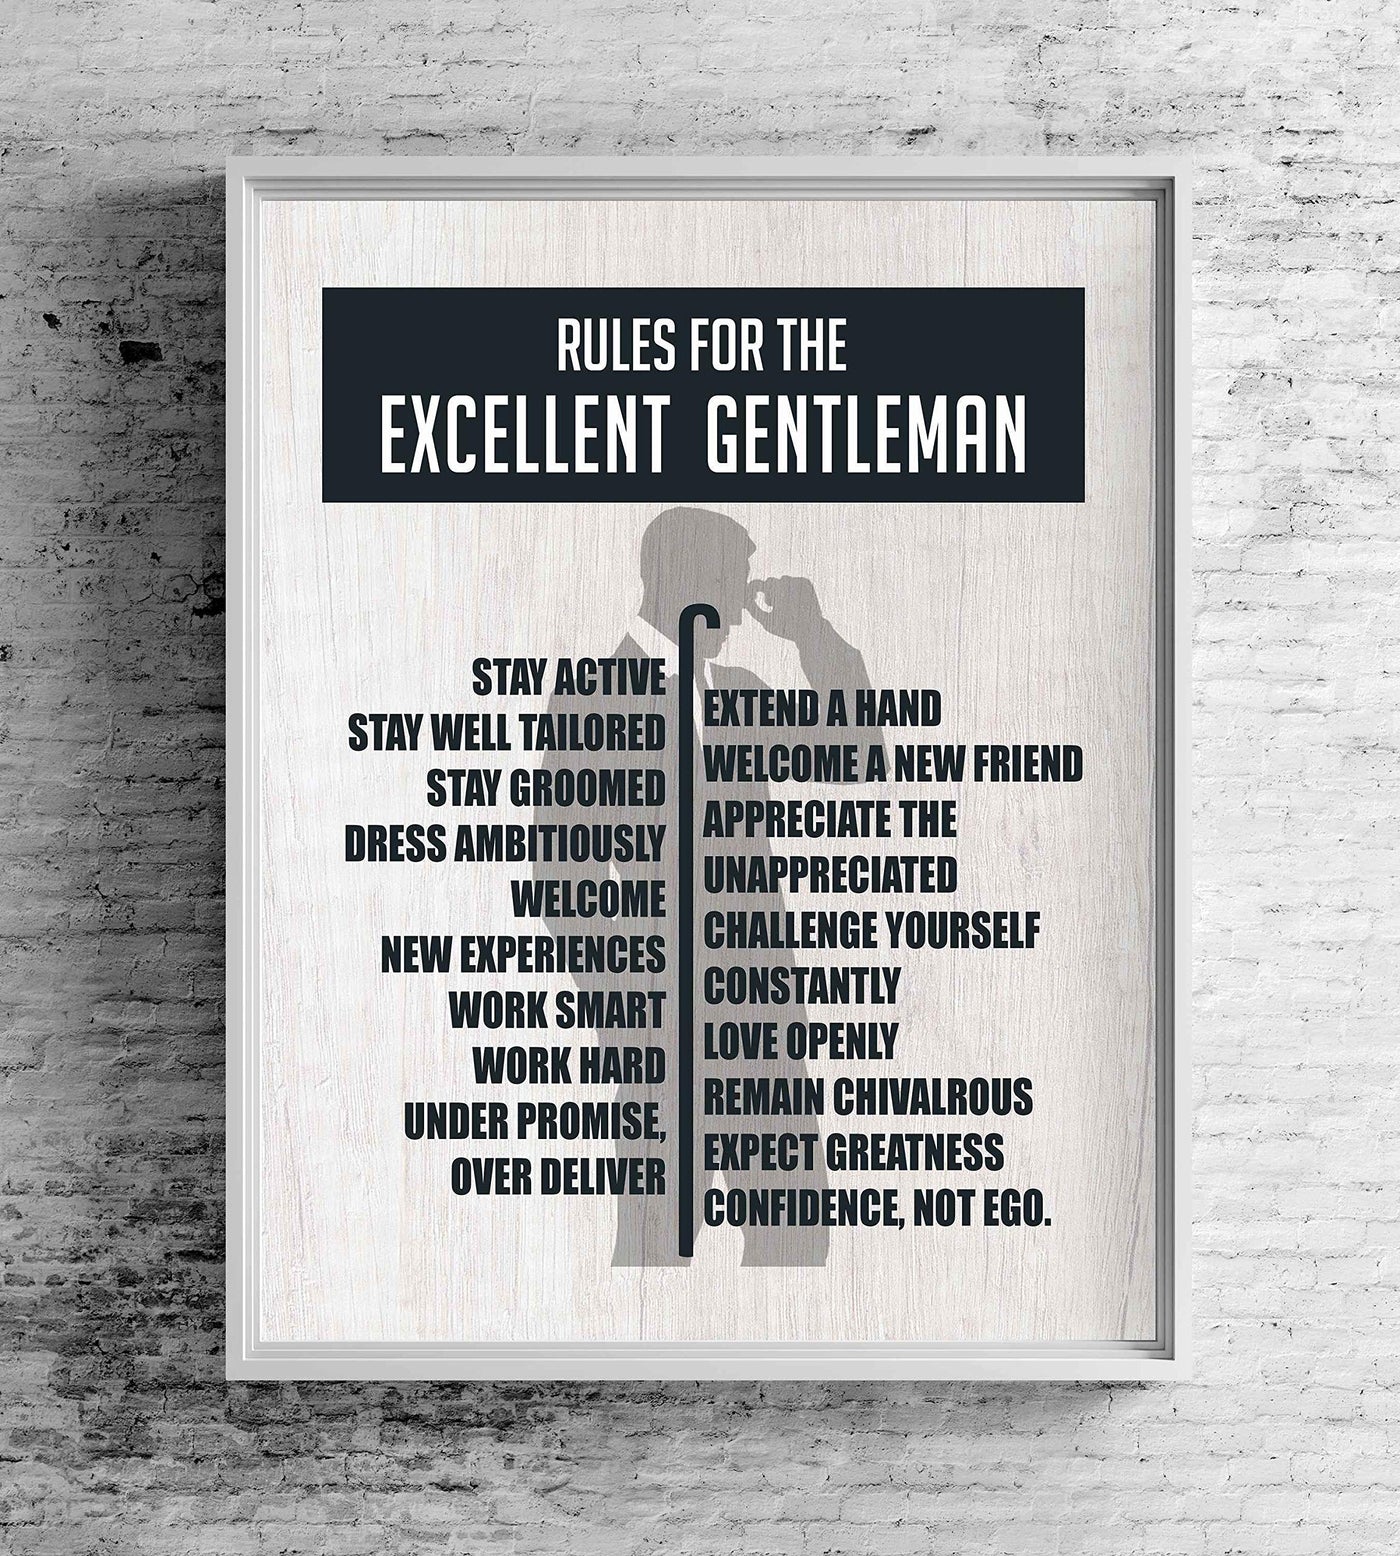 Rules for the Excellent Gentleman Inspirational Gentlemen Quotes Wall Art -8 x 10" Modern Poster Print w/Man Silhouette-Ready to Frame. Home-Office-Man Cave-Shop Decor. Great Tips for All Men!